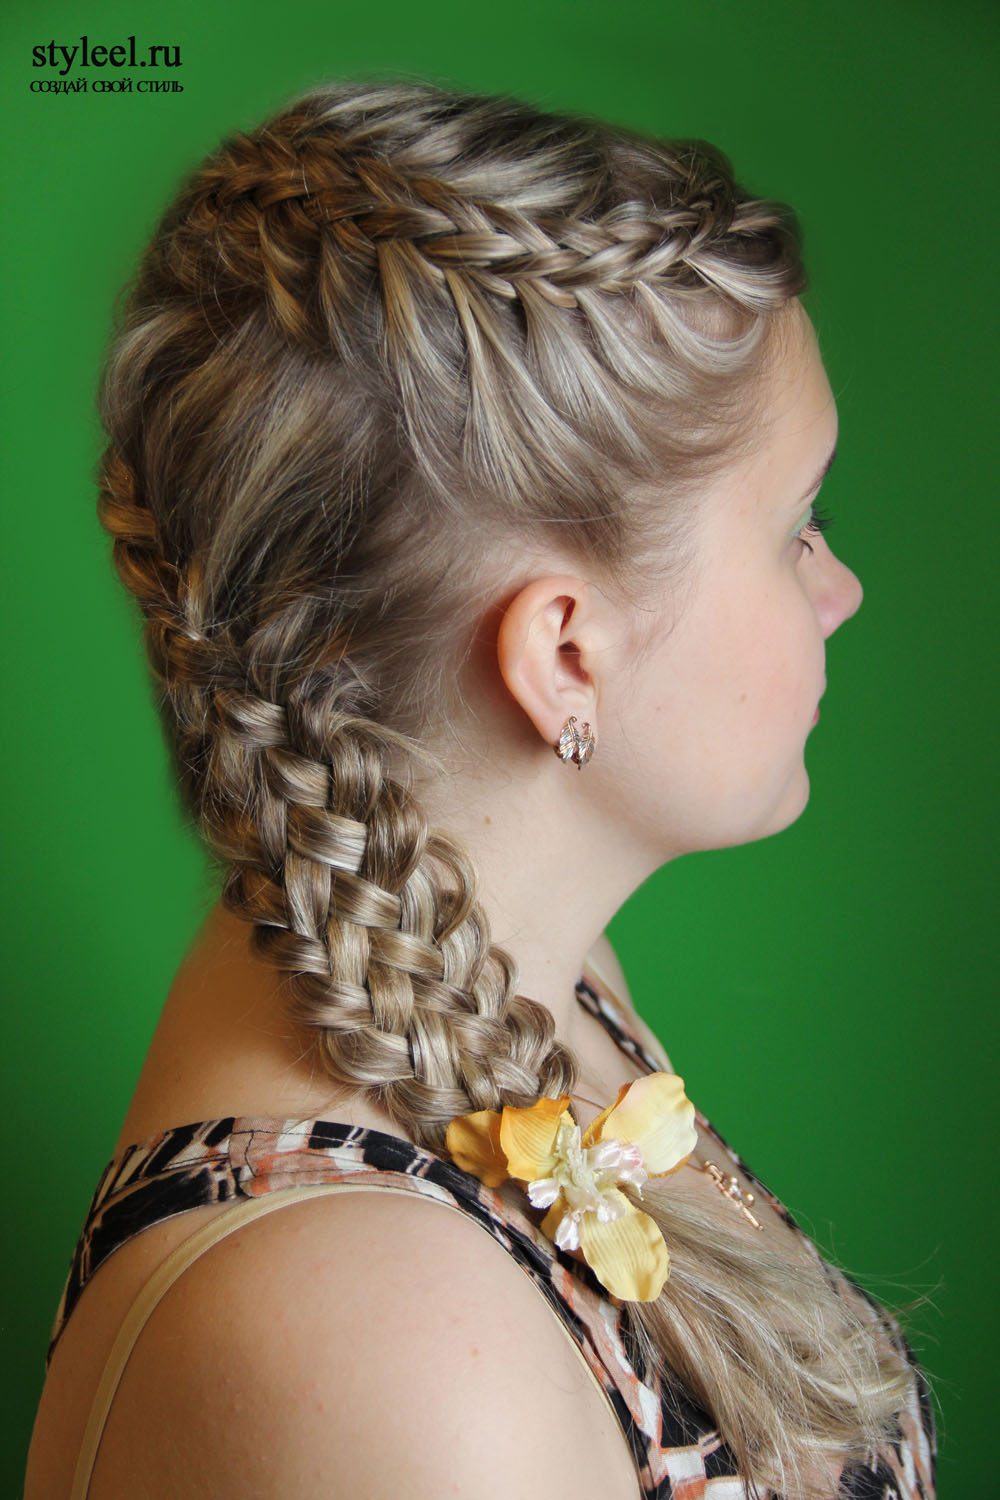 Local style: Forty and one braid hairstyles